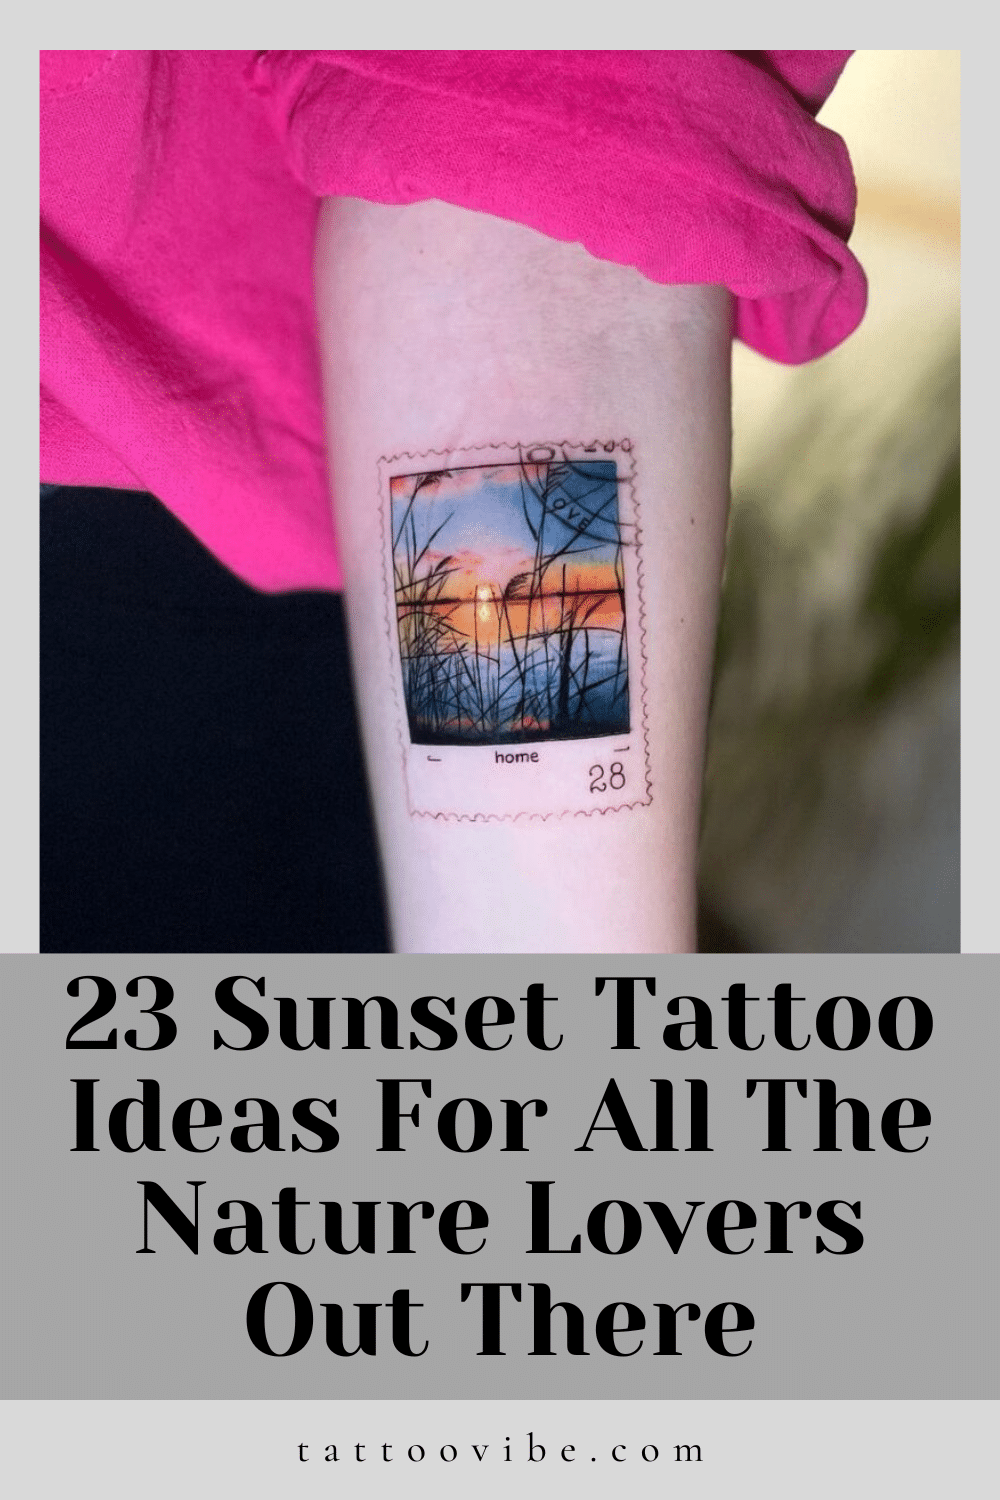 23 Sunset Tattoo Ideas For All The Nature Lovers Out There